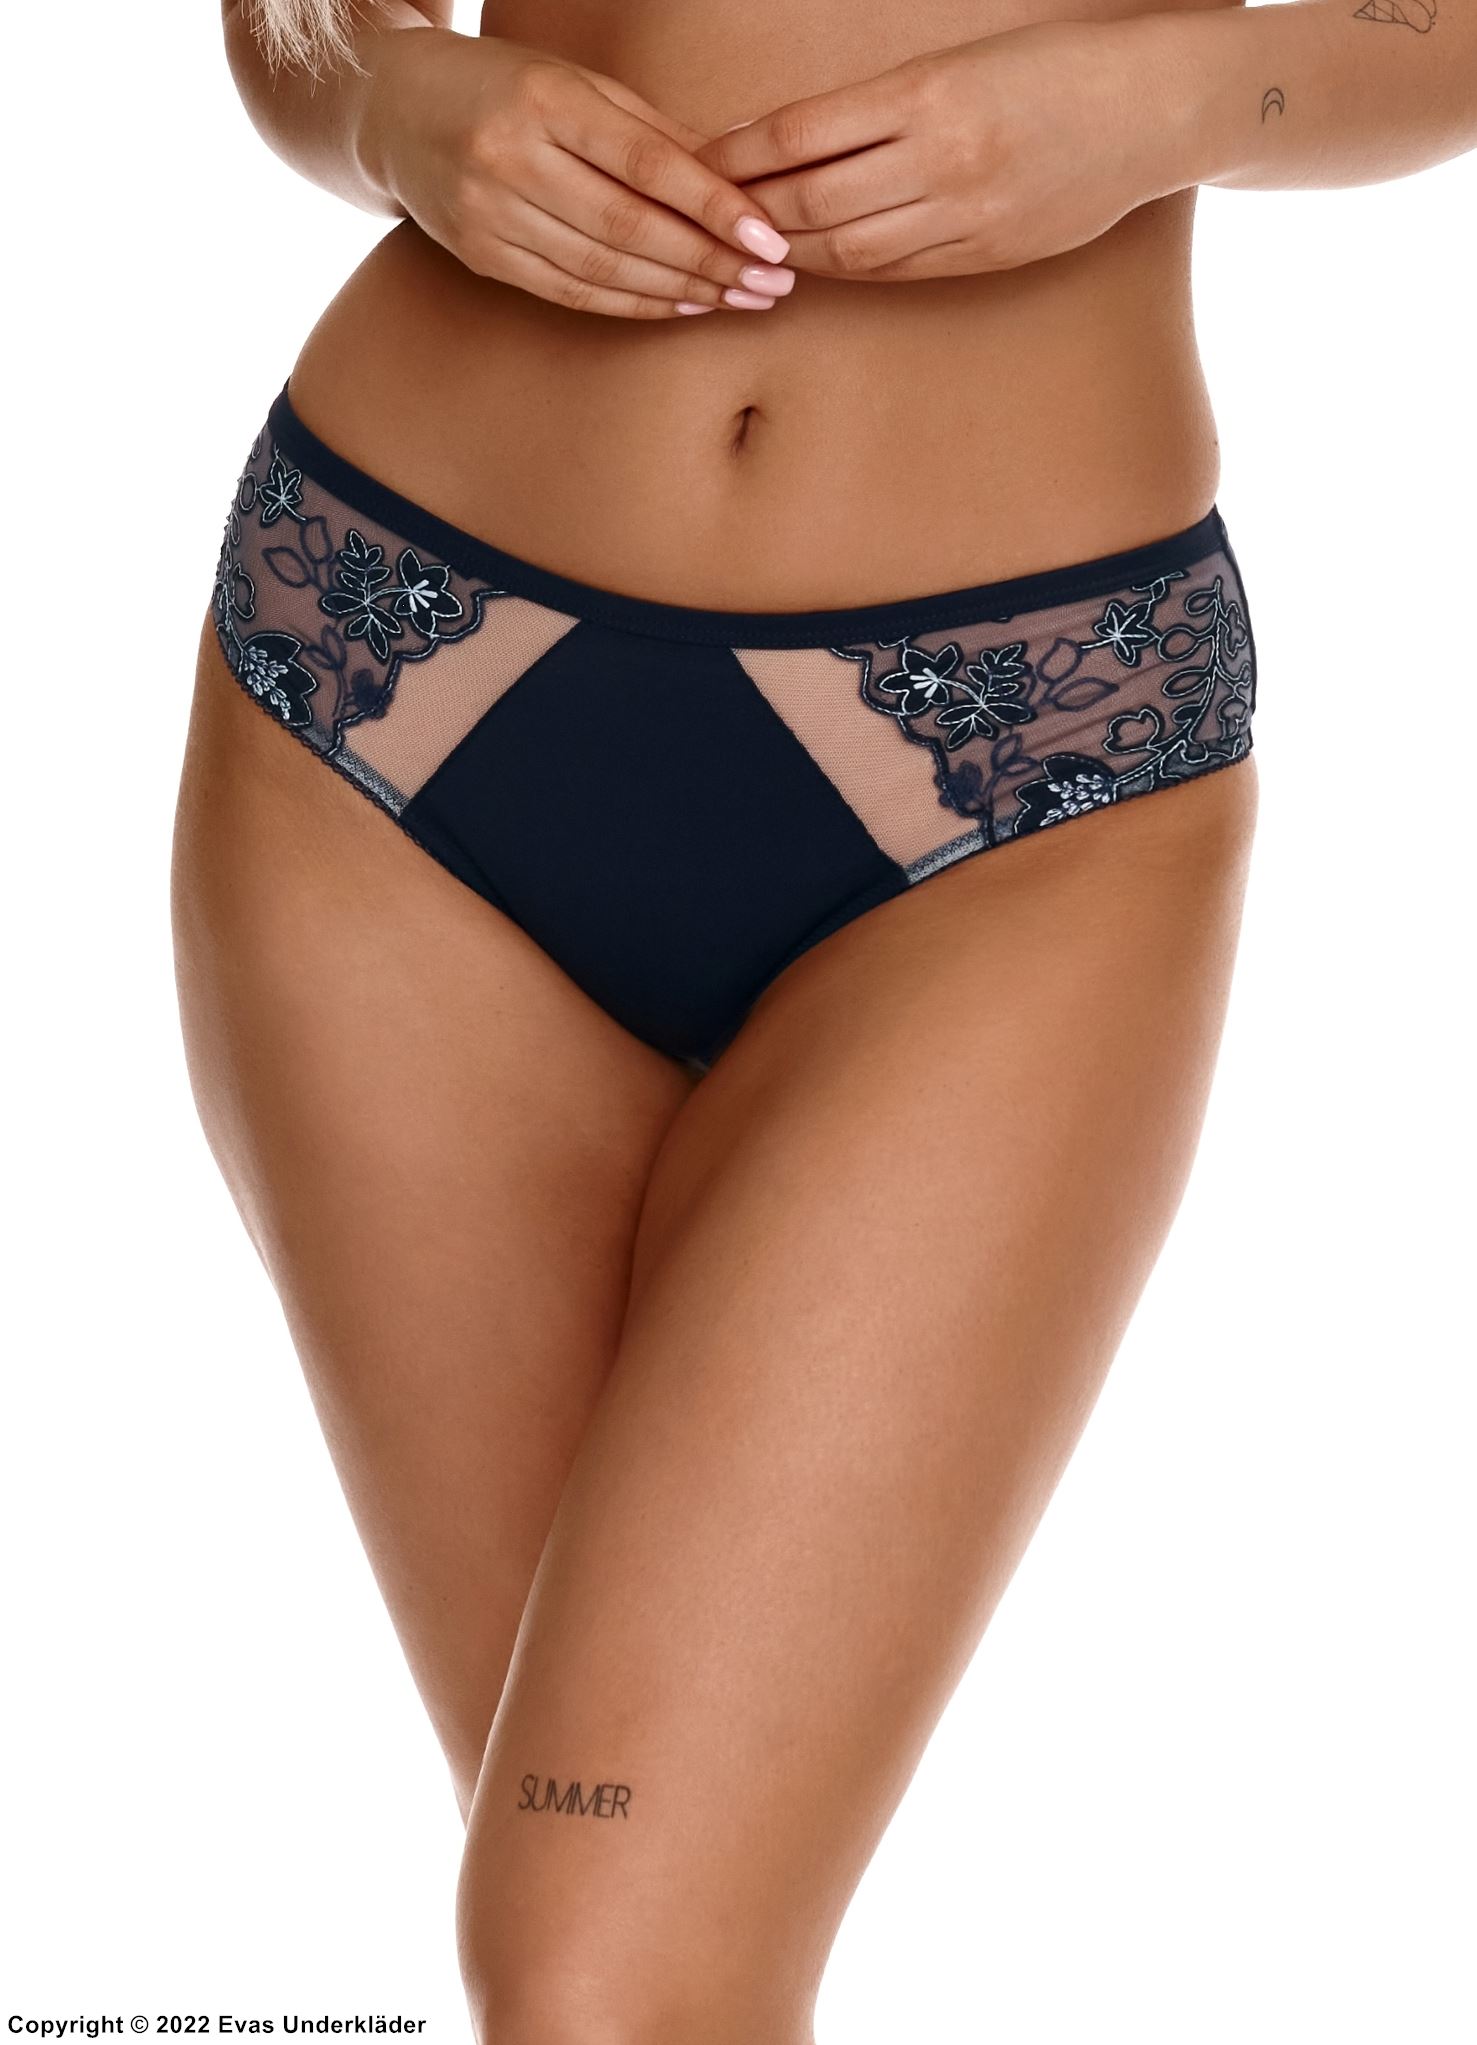 Romantic cheeky panties, embroidery, mesh inlay, invisible under